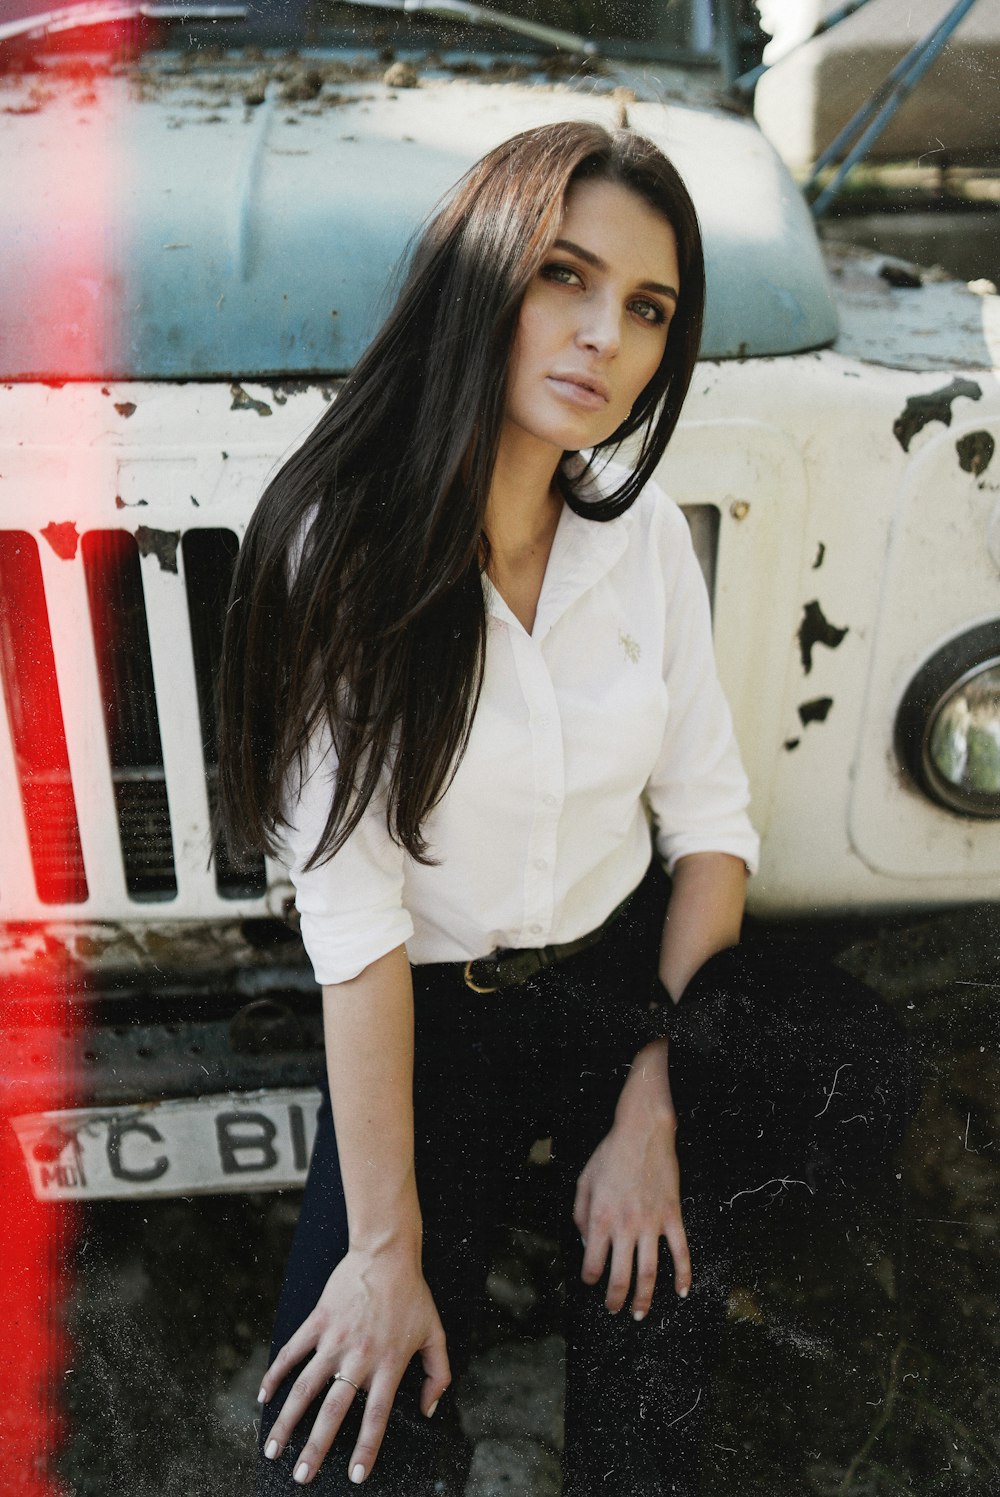 woman in white button up shirt and black skirt standing beside white car